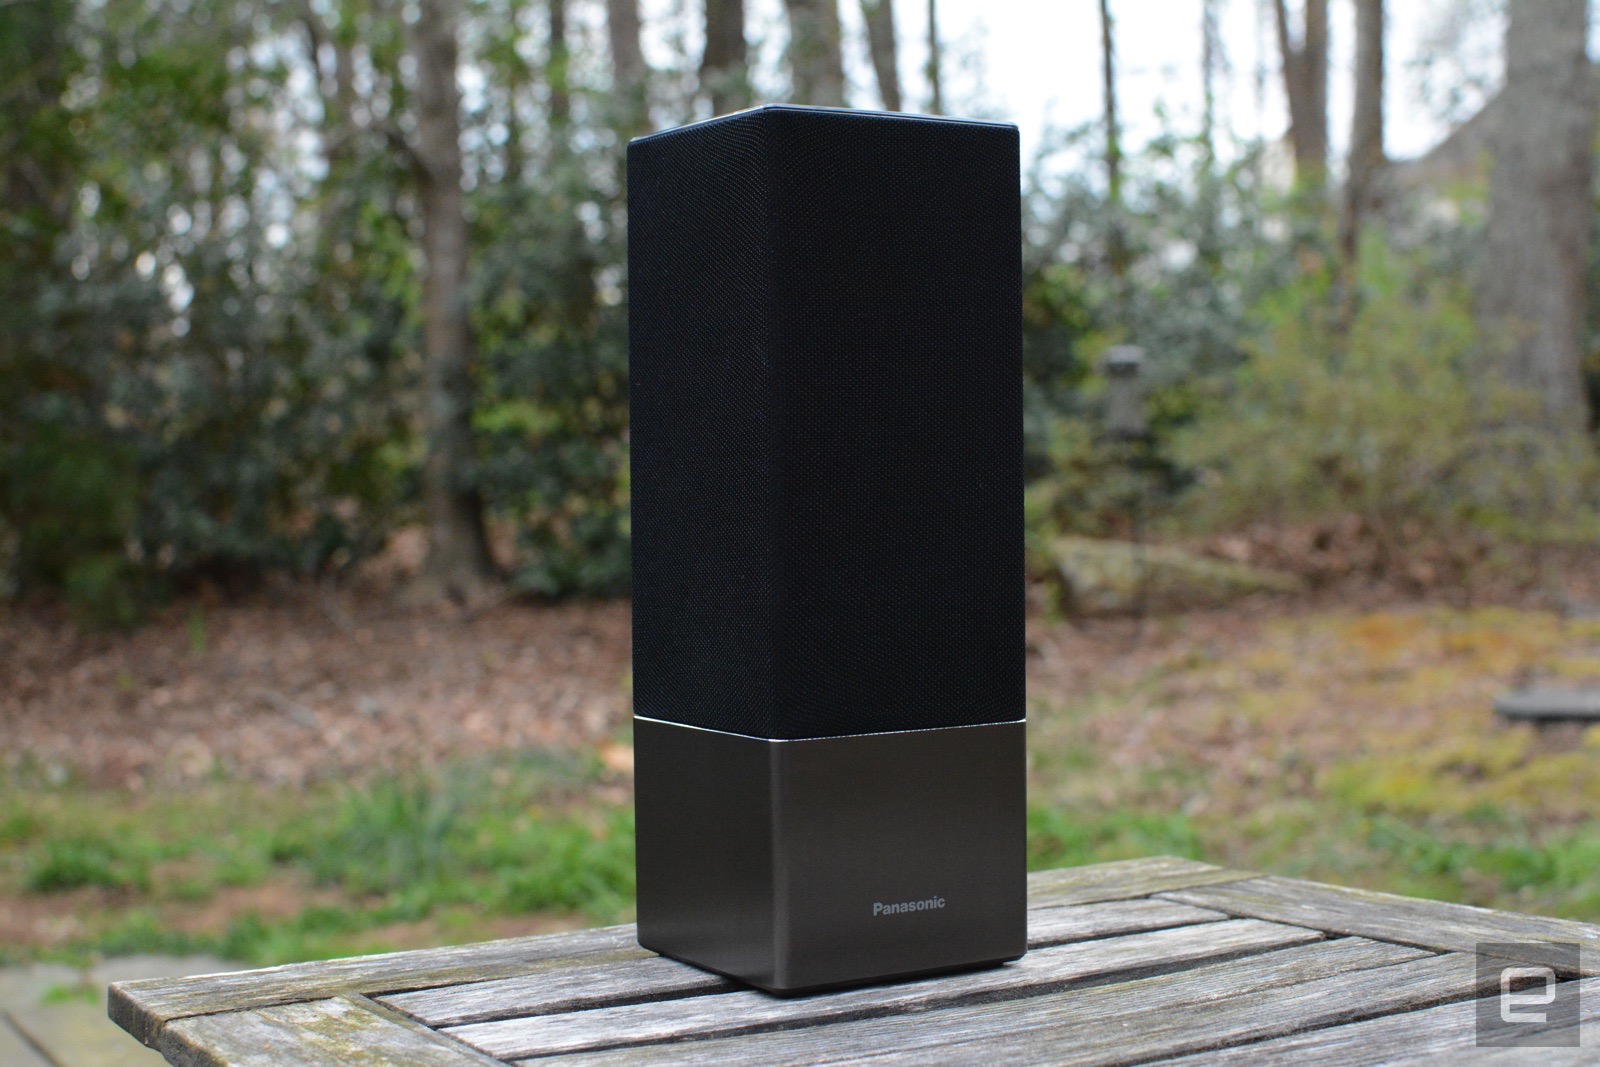 Panasonic SC-GA10 review: A smart speaker that fails to stand out 